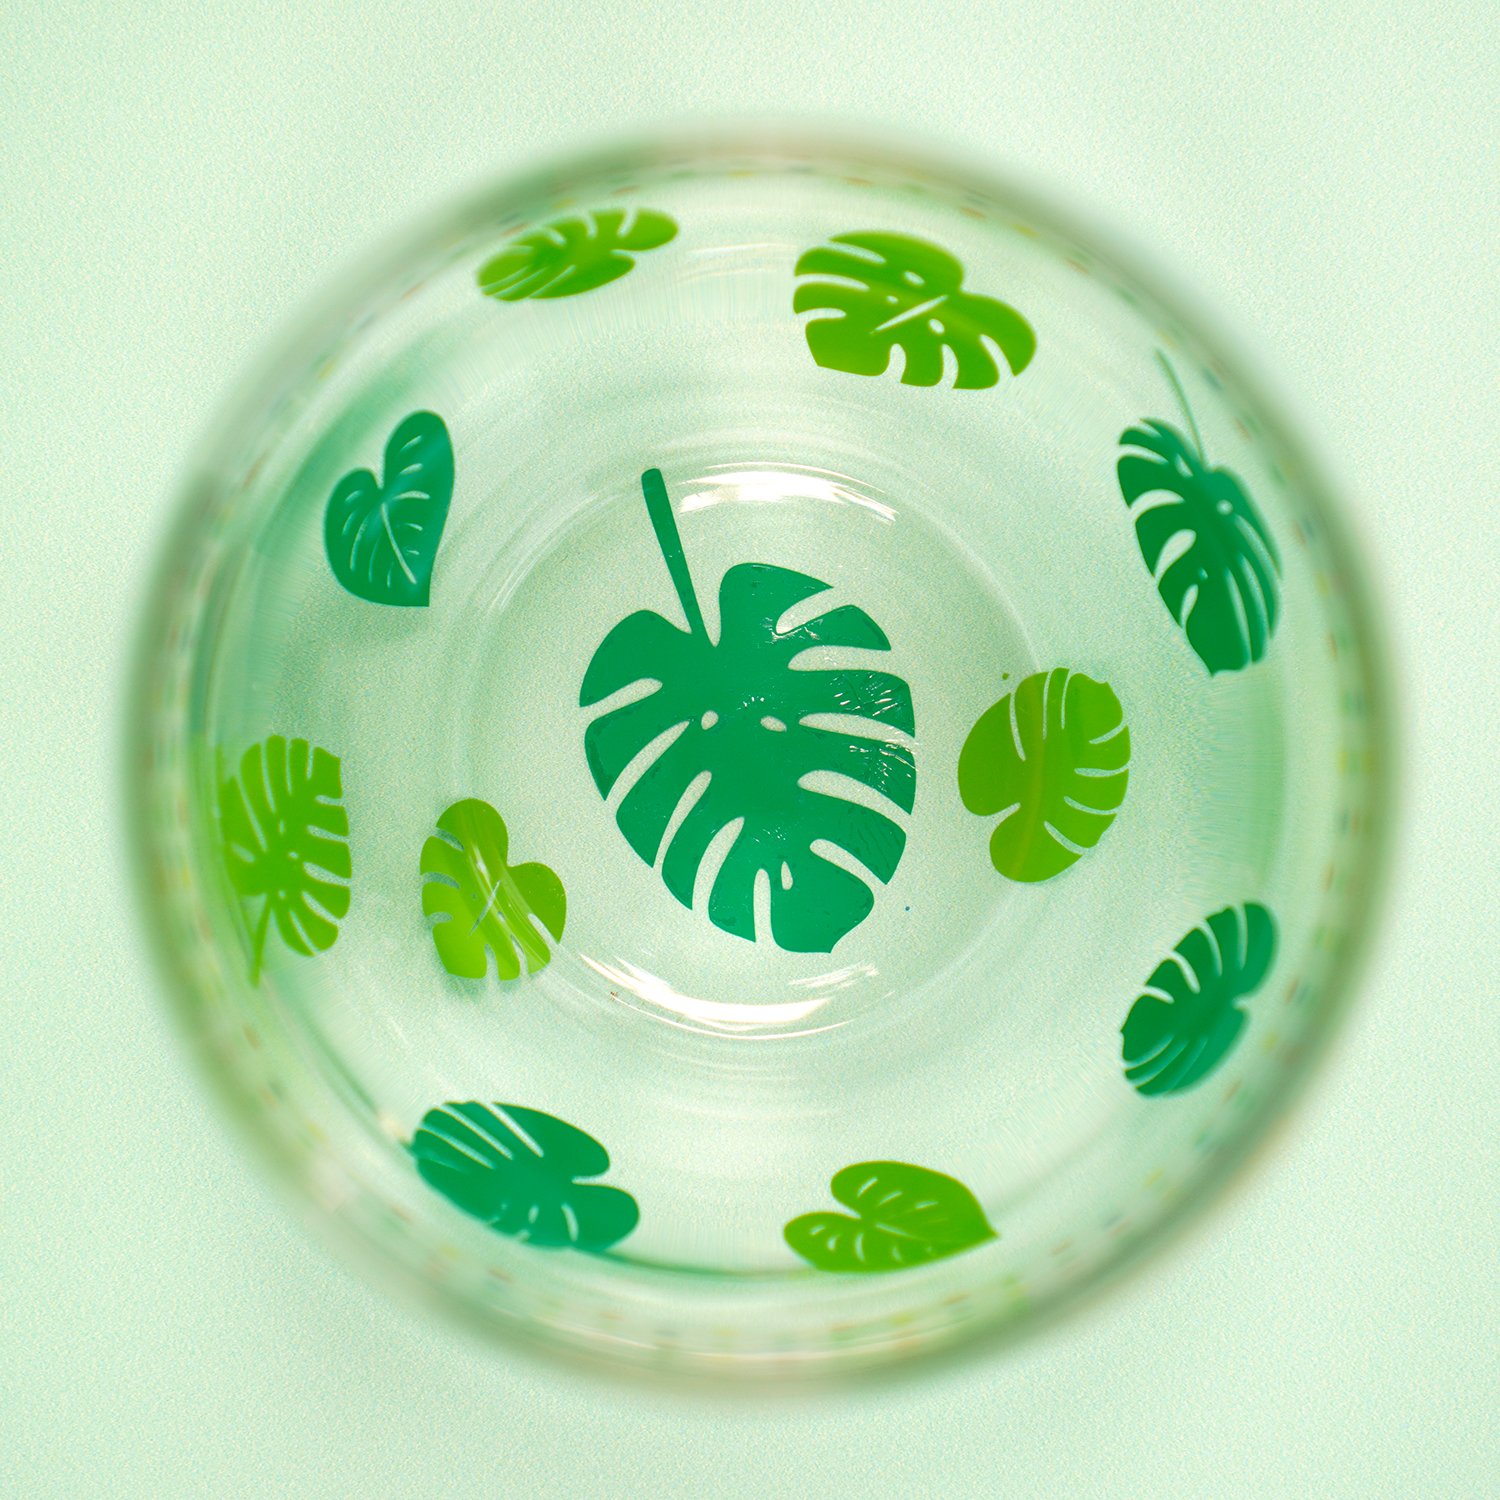 Inside of wine glass with tropical monstera leaves in different shades of green